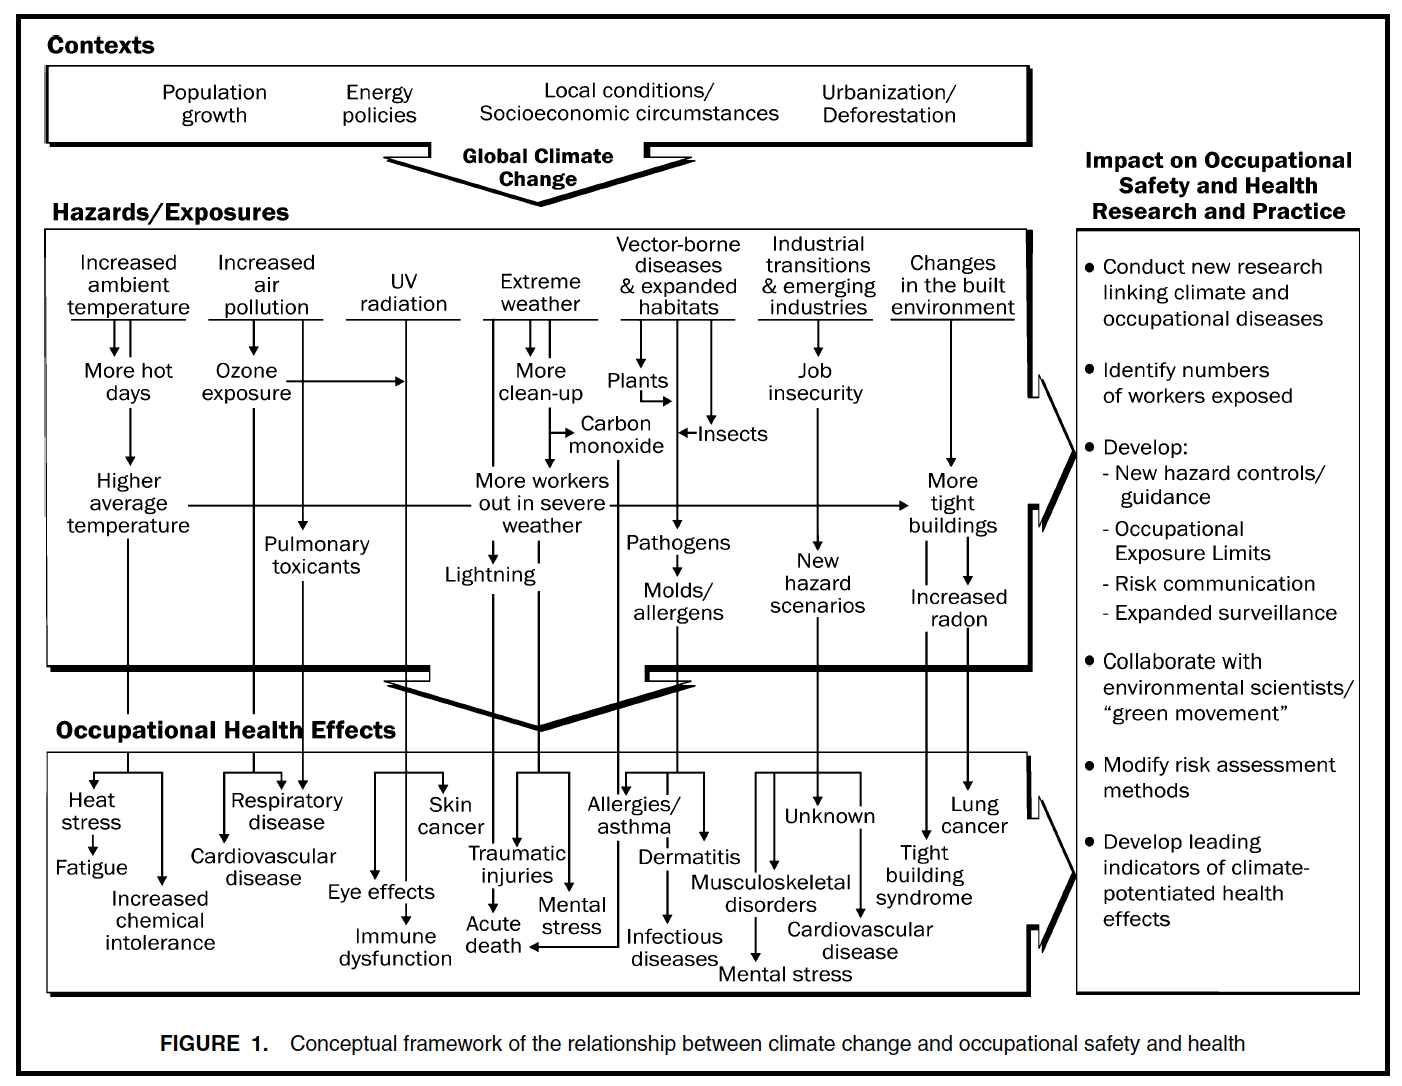 Schulte and Chun (2009): Climate Change and Occupational Safety and Health: a Preliminary Framework